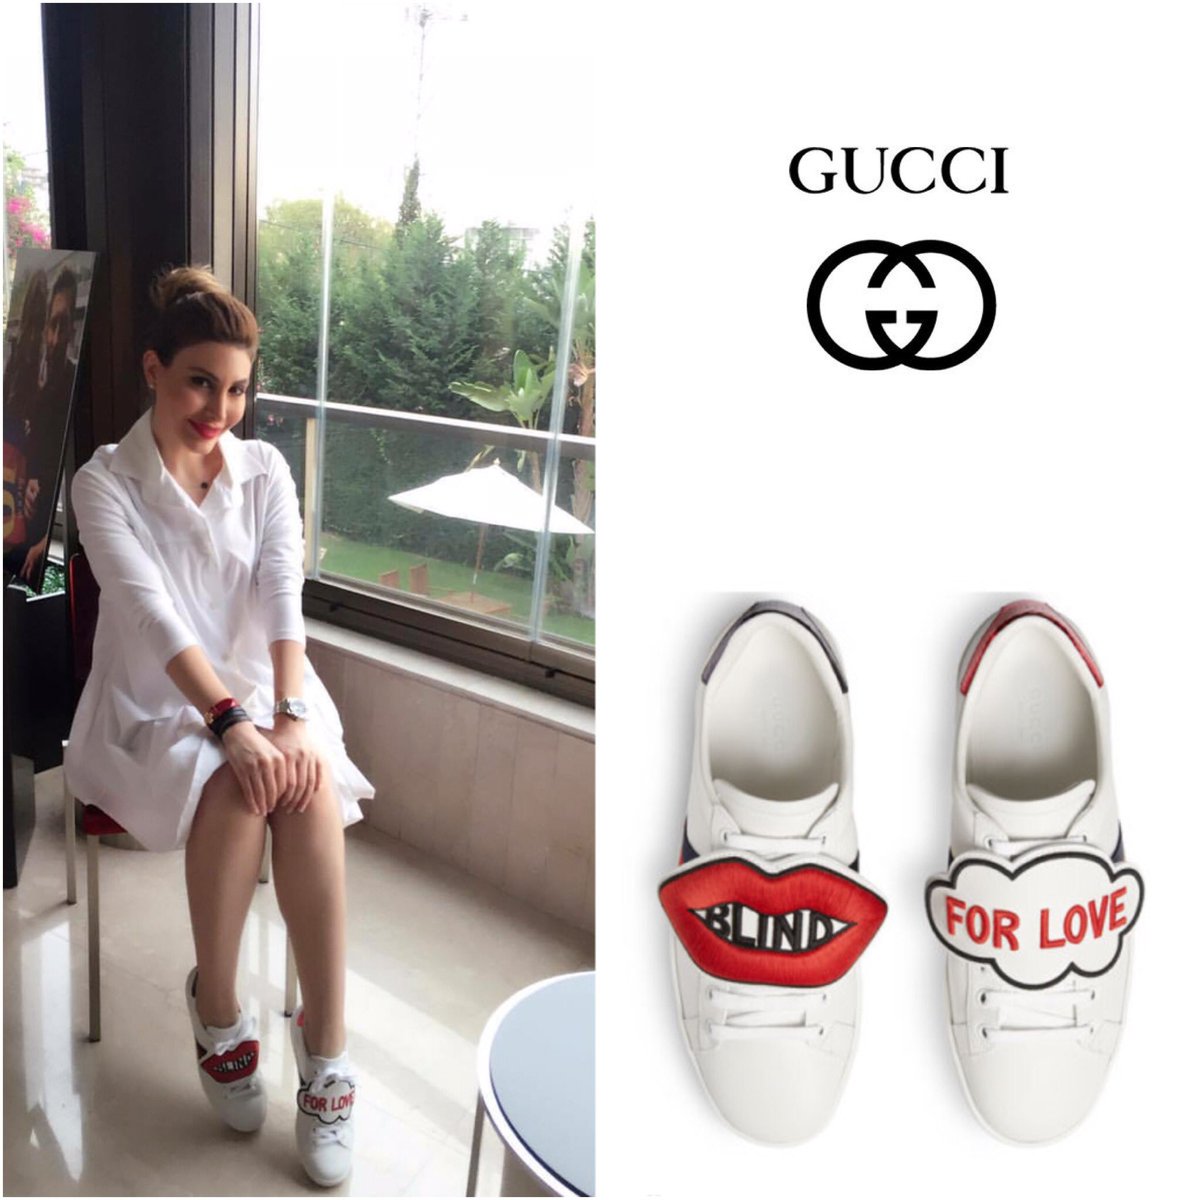 blind for love gucci shoes